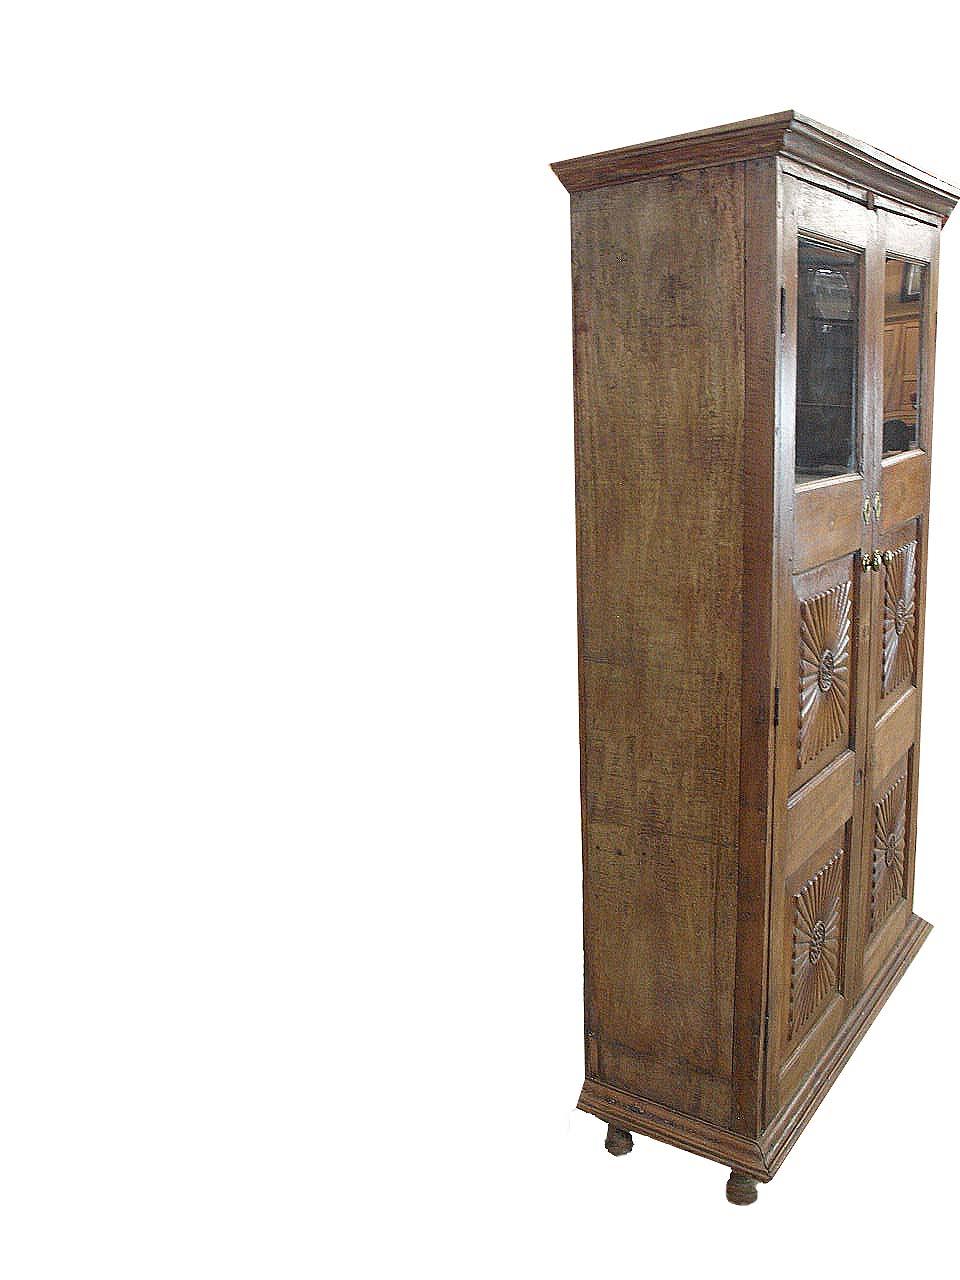 Glass door carved cupboard, with cove cornice above two doors with glass panels at the top and double carved panels below, interior with two shelves, resting on turned feet. It retains its original interior steel door latch.